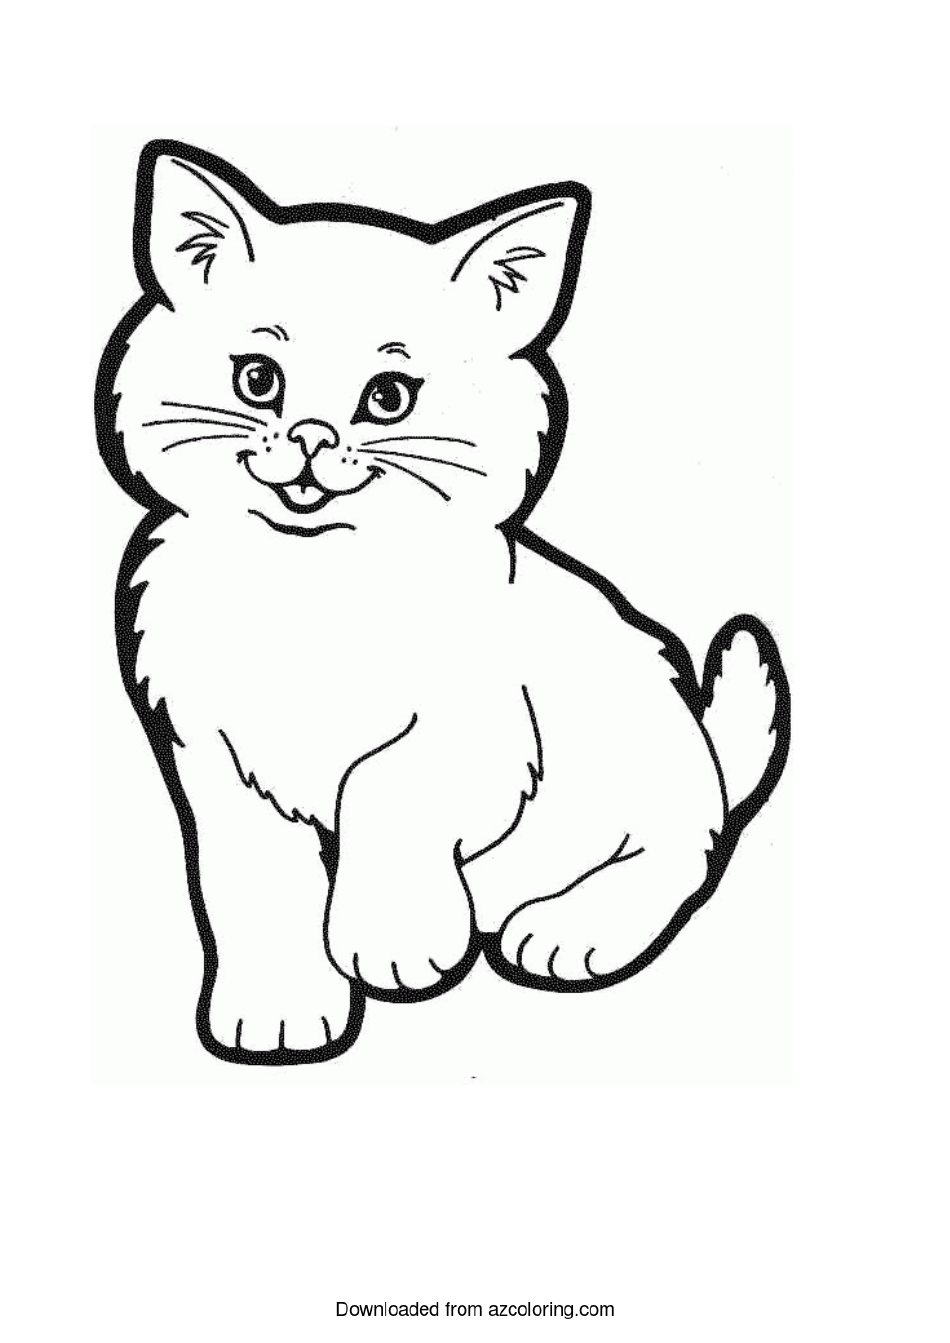 Little Kitten Coloring Page - Preview Image